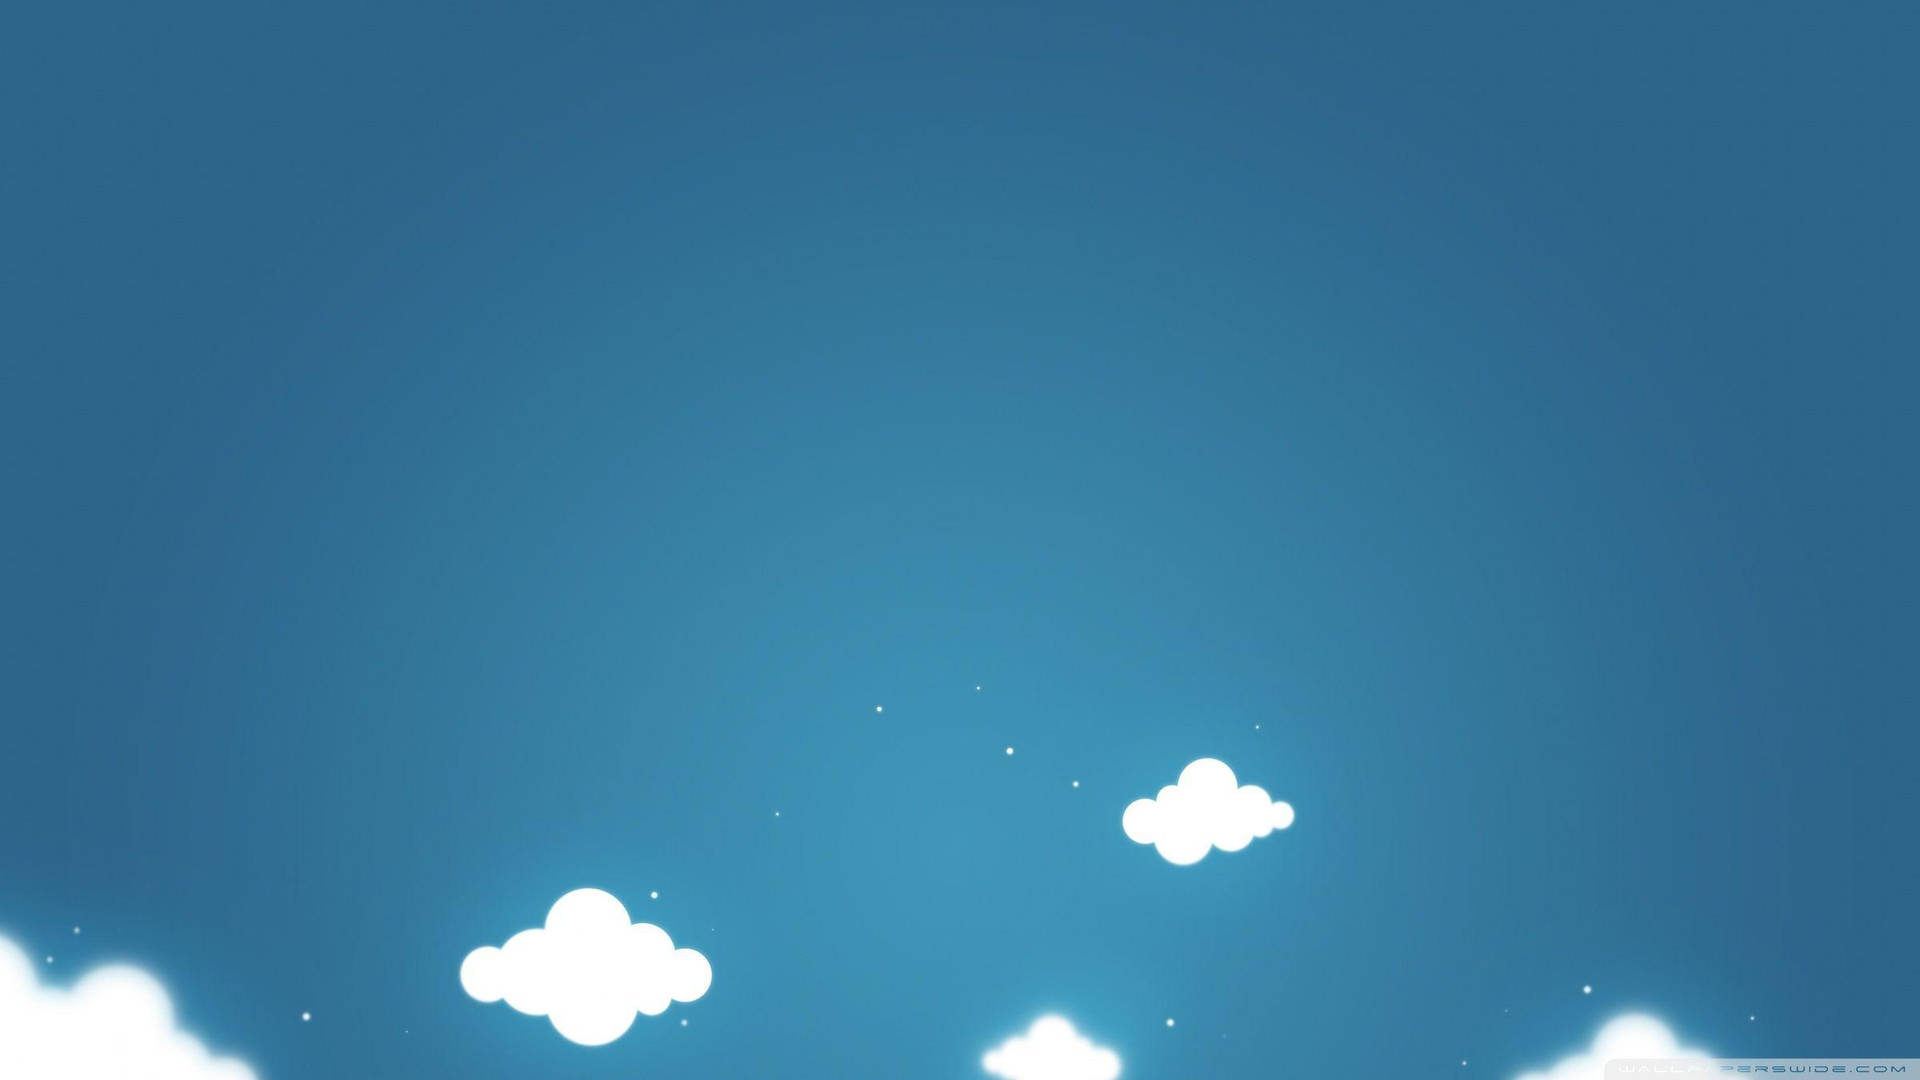 Minimal Aesthetic Clouds With Cartoony Design Background